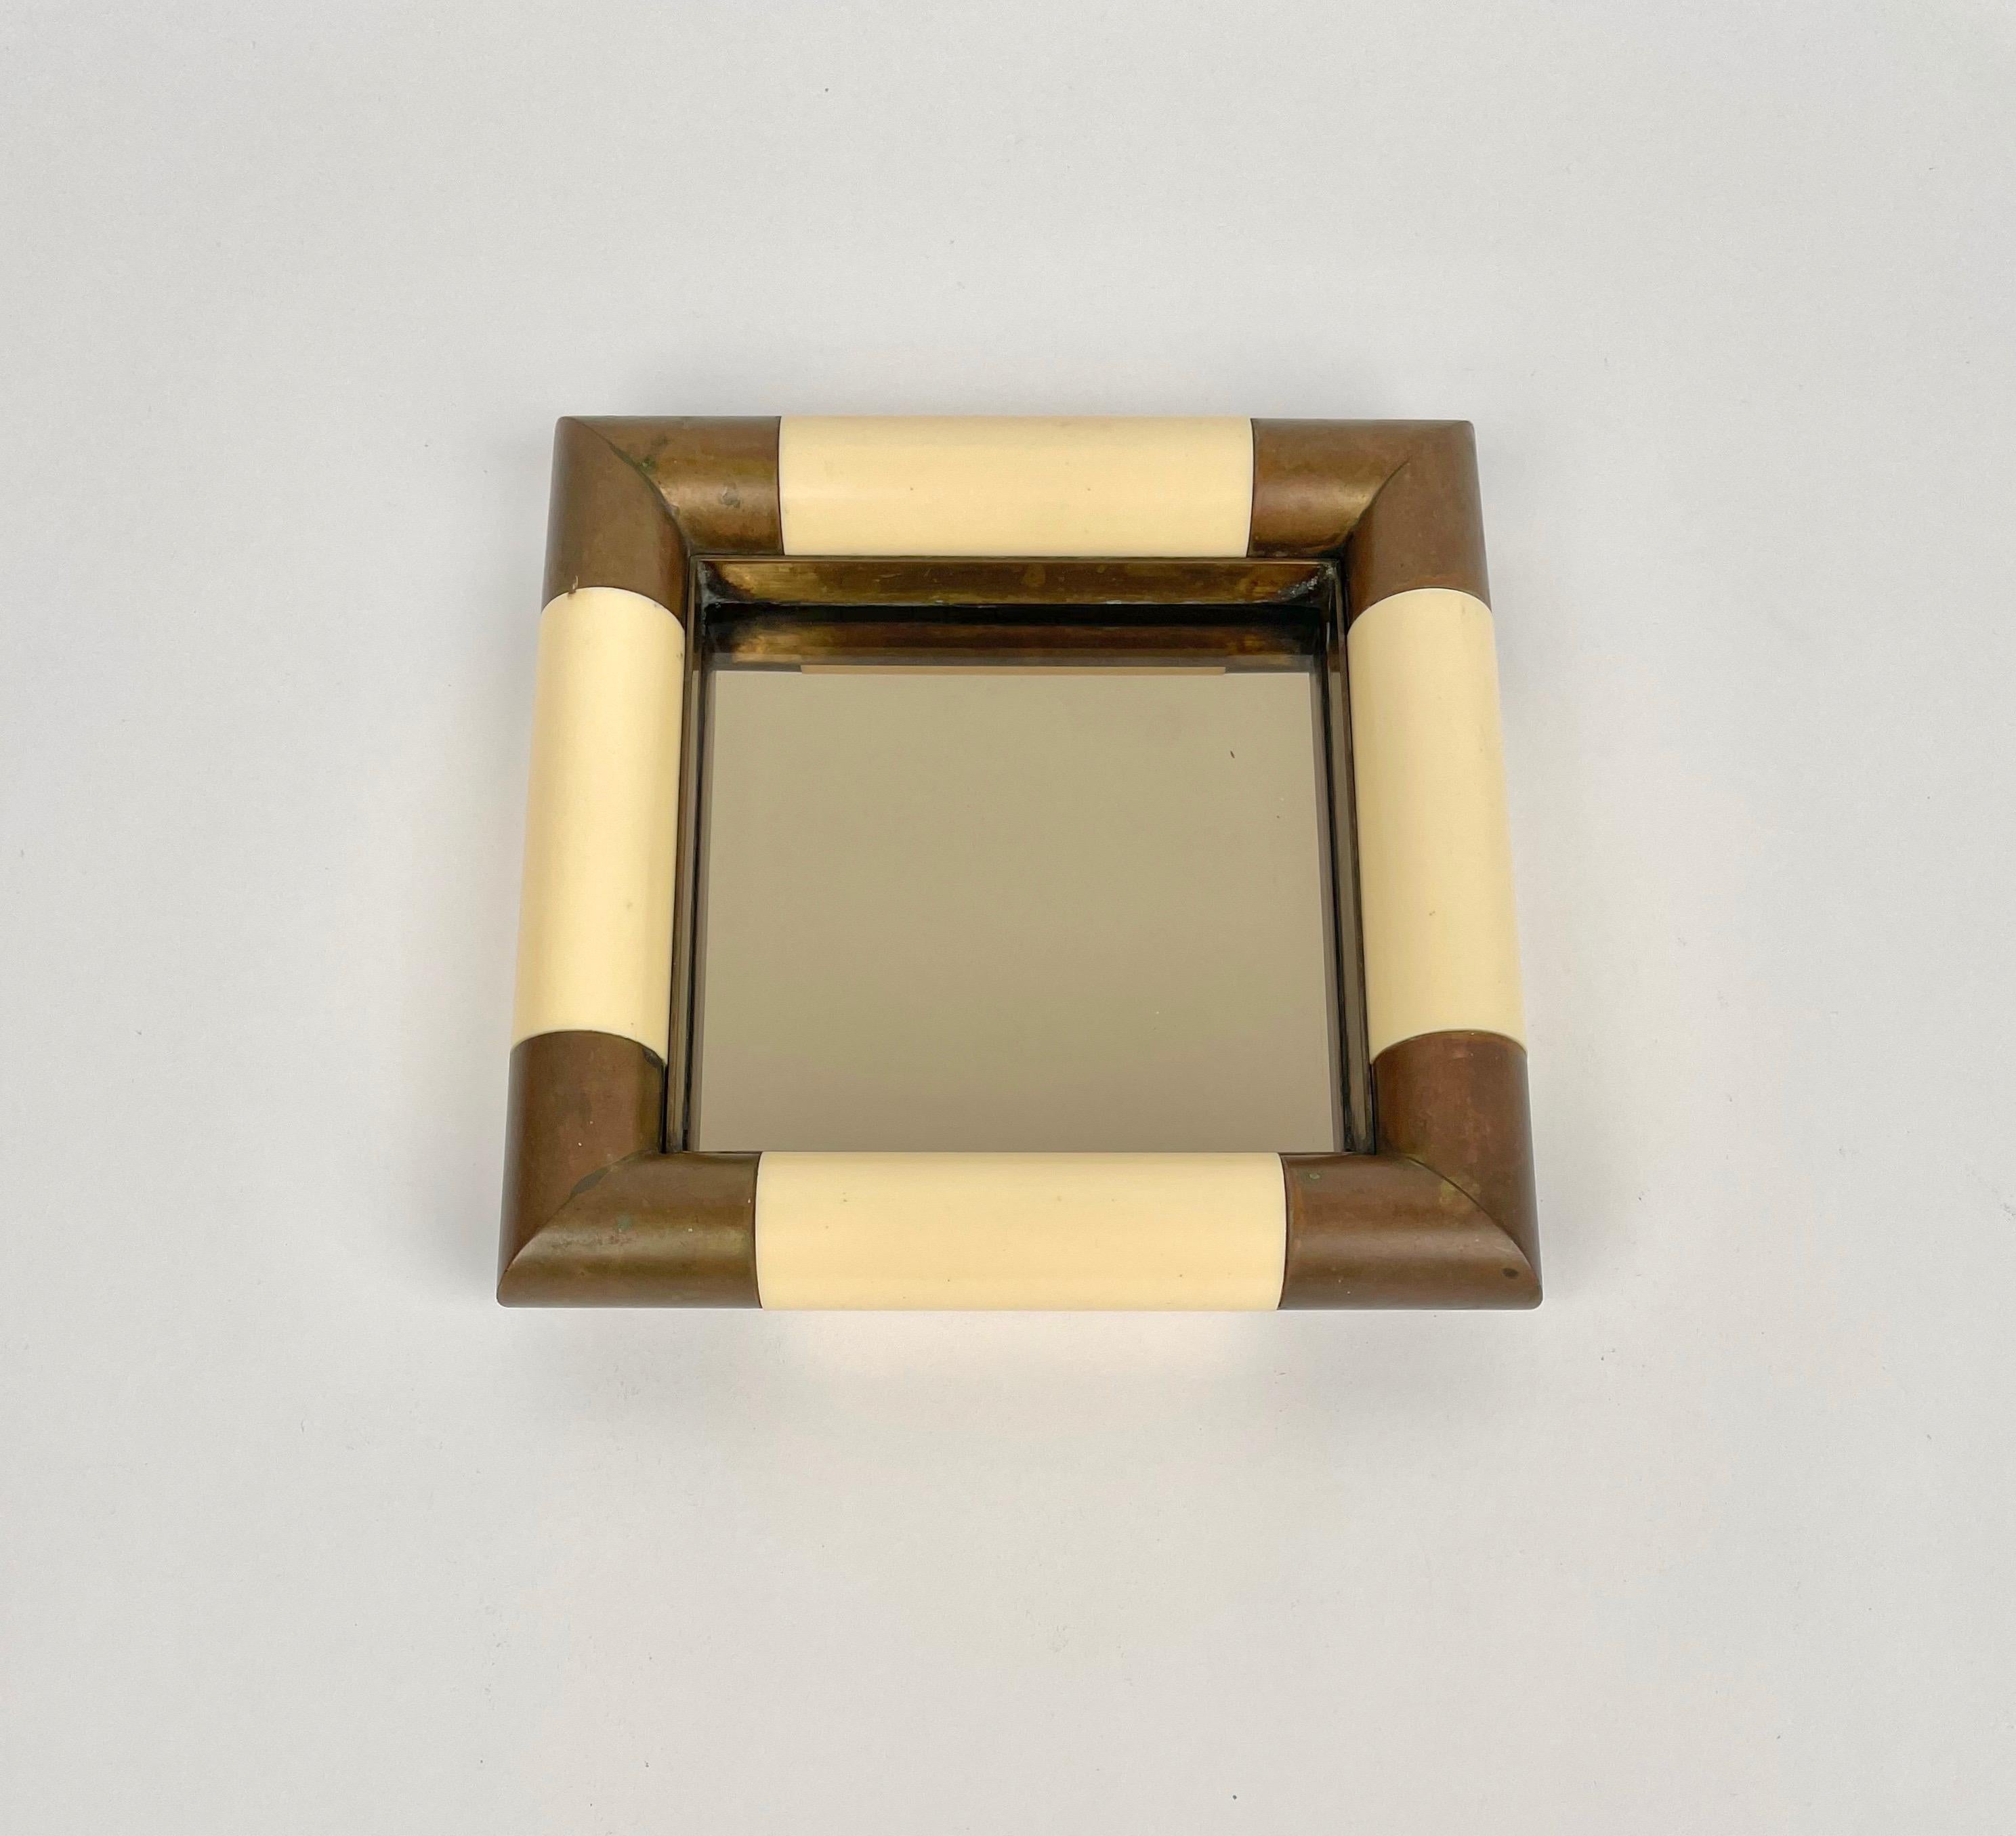 Squared vide-poche in bronzed mirror with brass corners and frame in ivory-colored plastic material by the Italian designer Tommaso Barbi. 

Made in Italy in the 1970s.